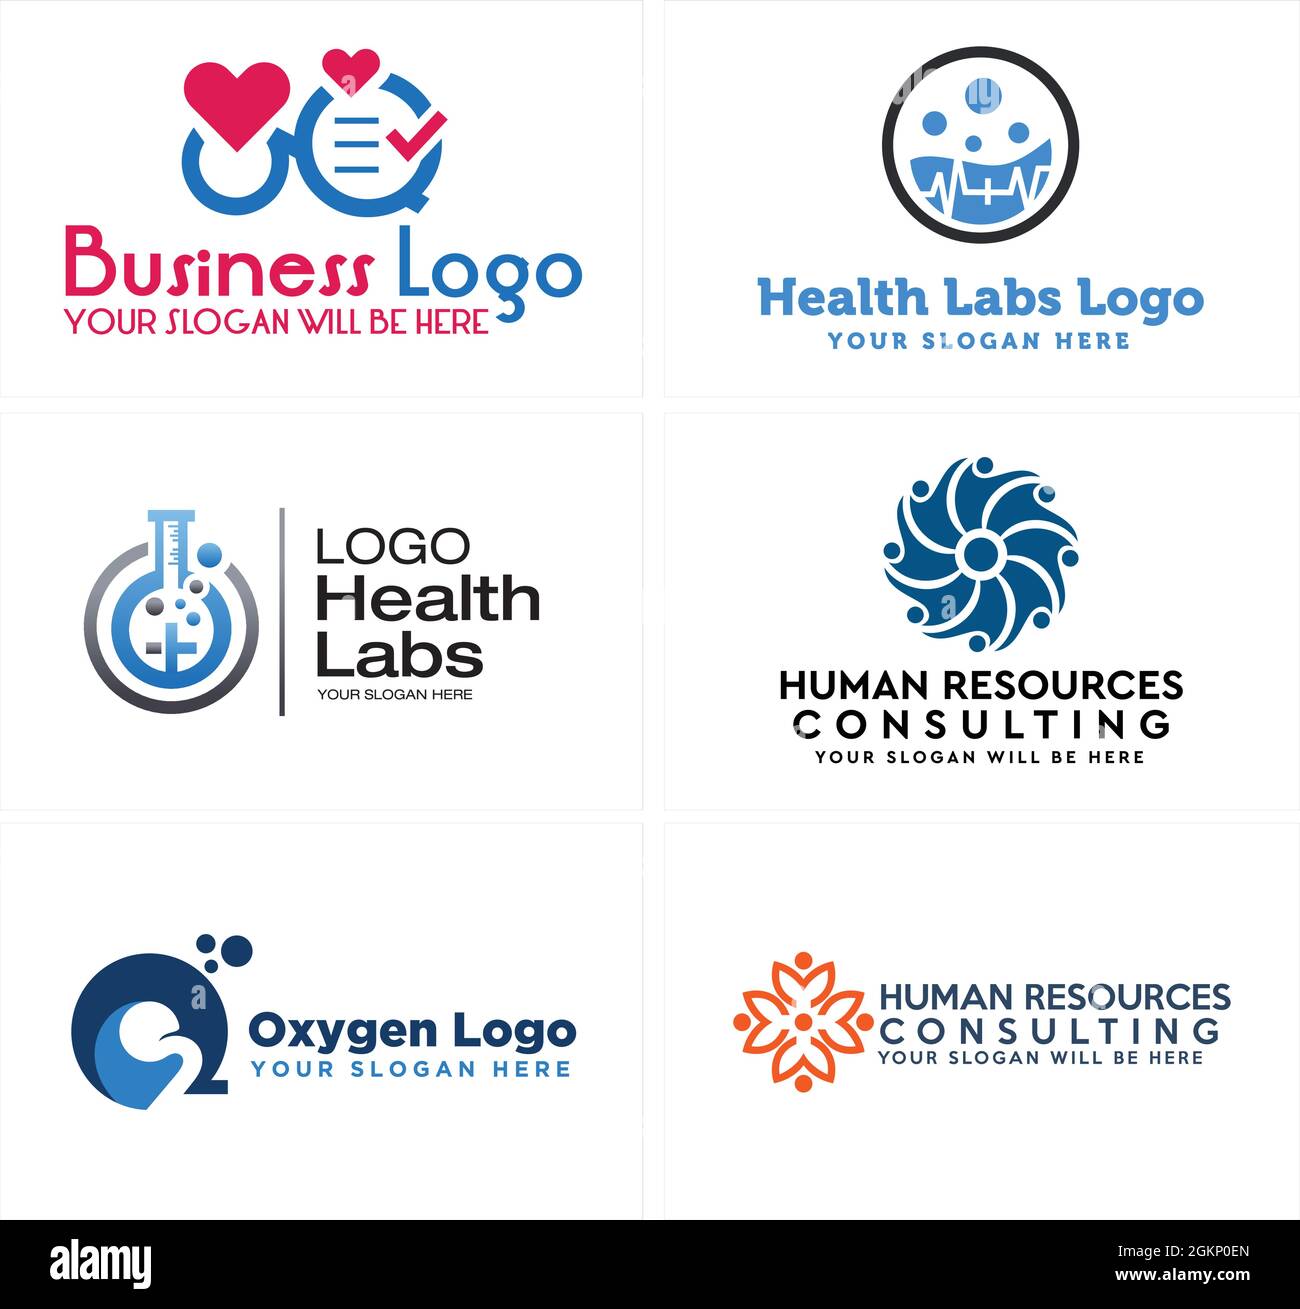 Laboratory human resources consulting logo design Stock Vector